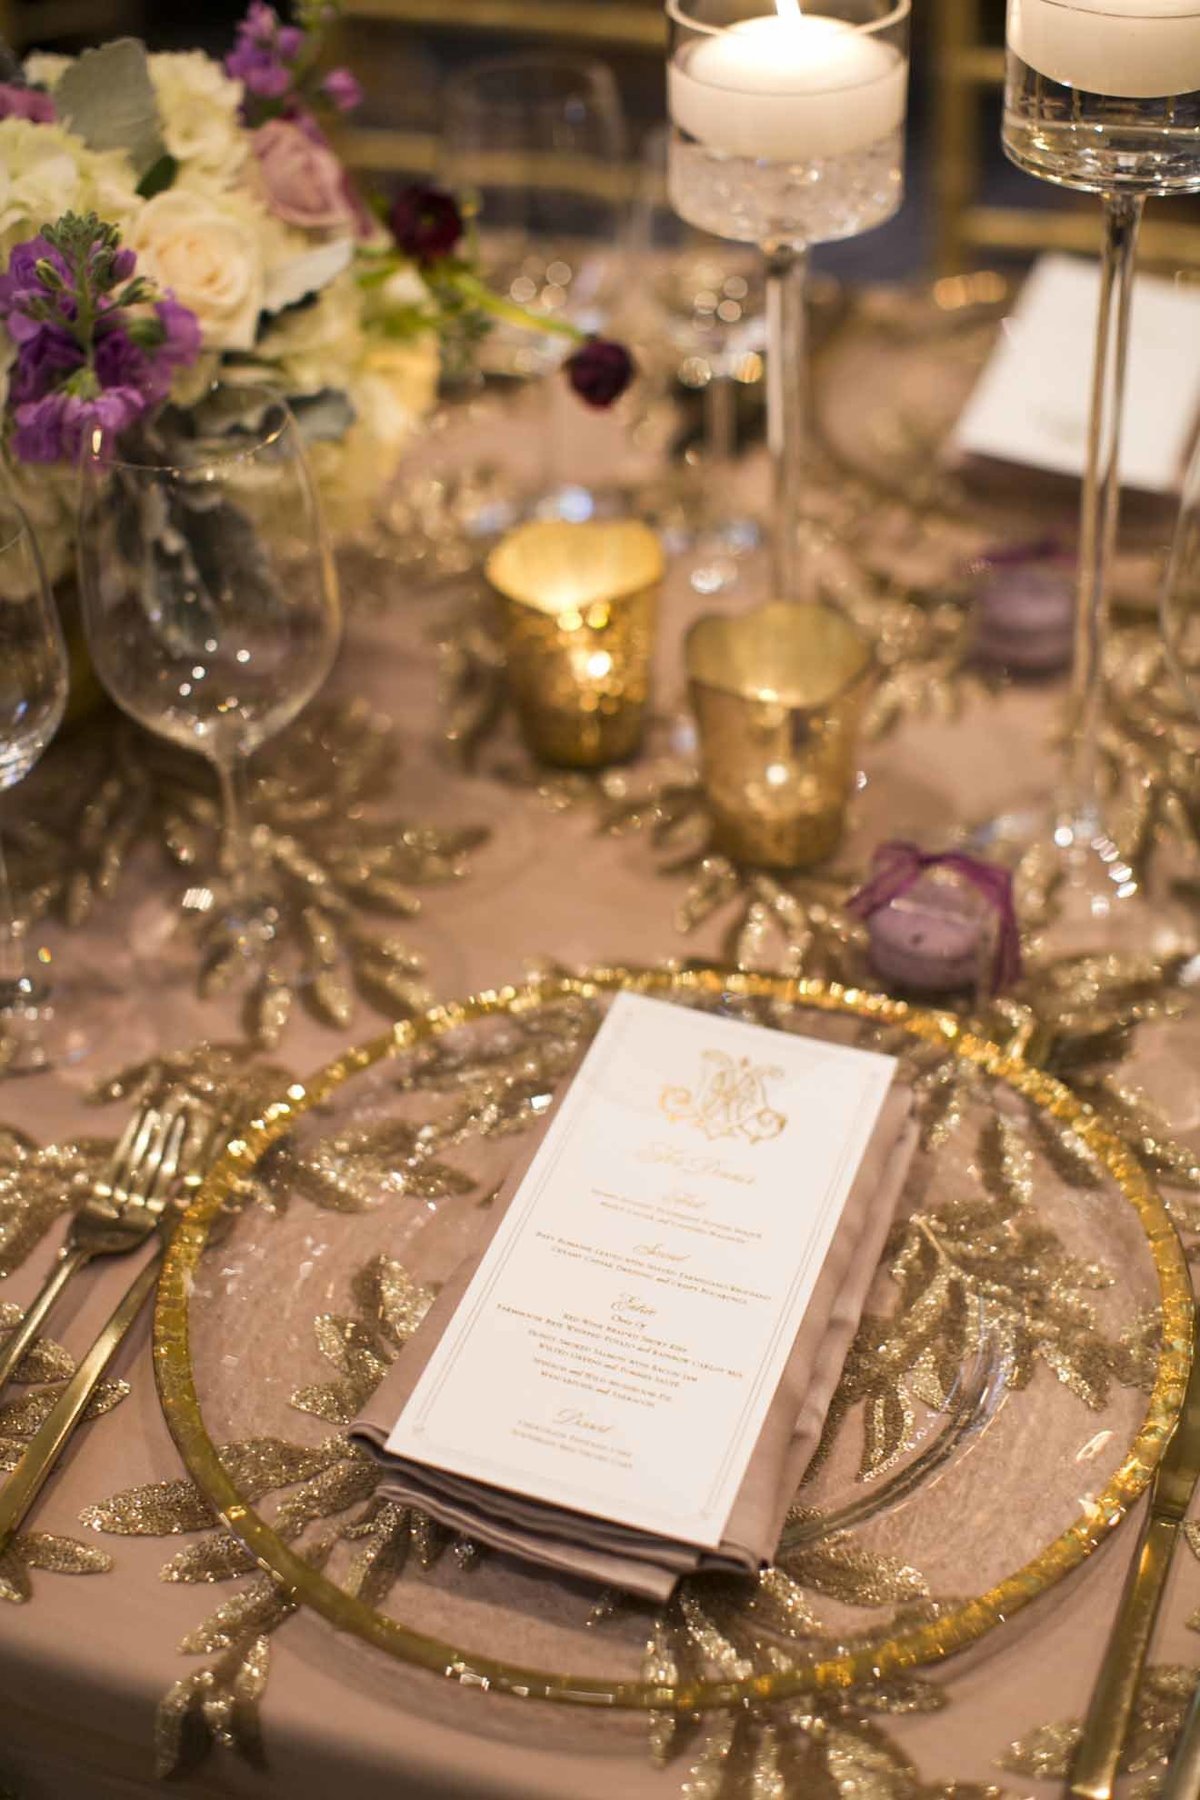 Gold place settings paired beautifully with Purple, and grey floral at this Seattle wedding reception.